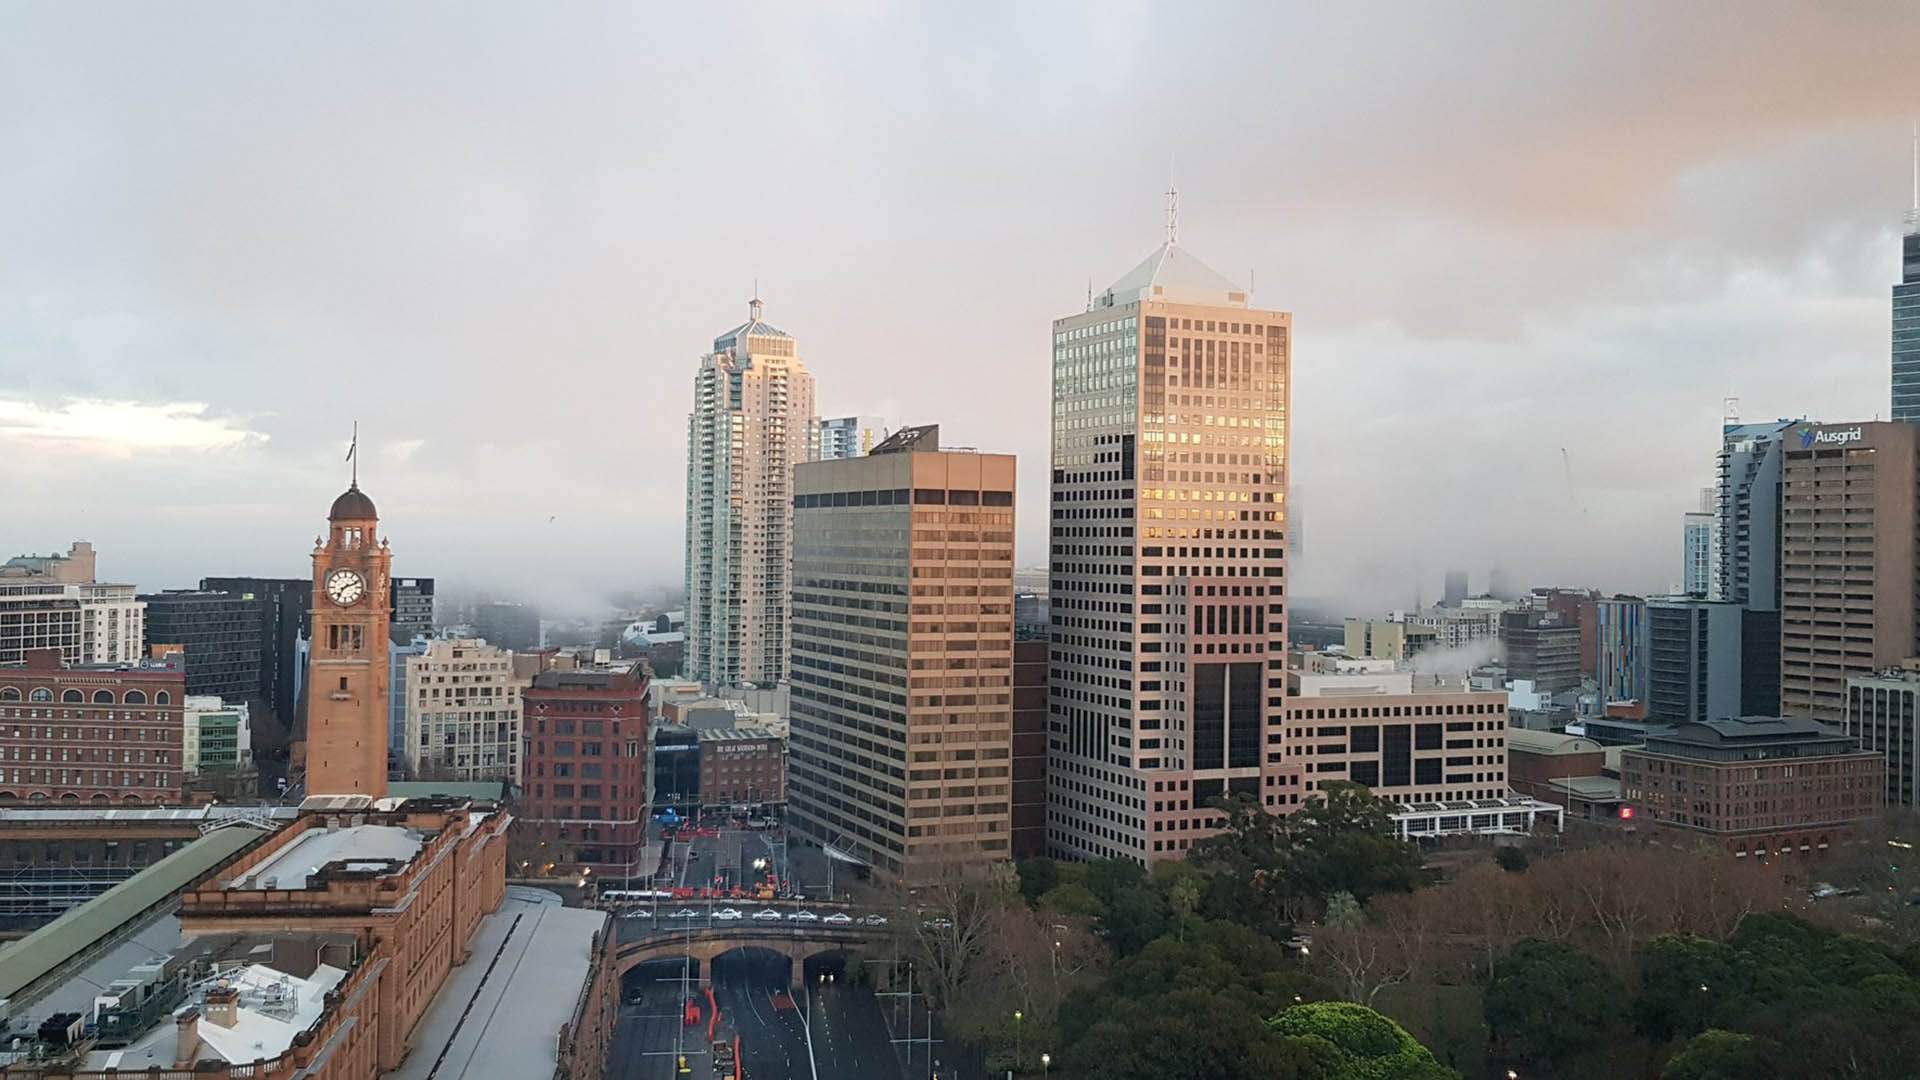 Sydney's Lingering Weekend Fog Is Causing Reduced Road Visibility and Flight Delays